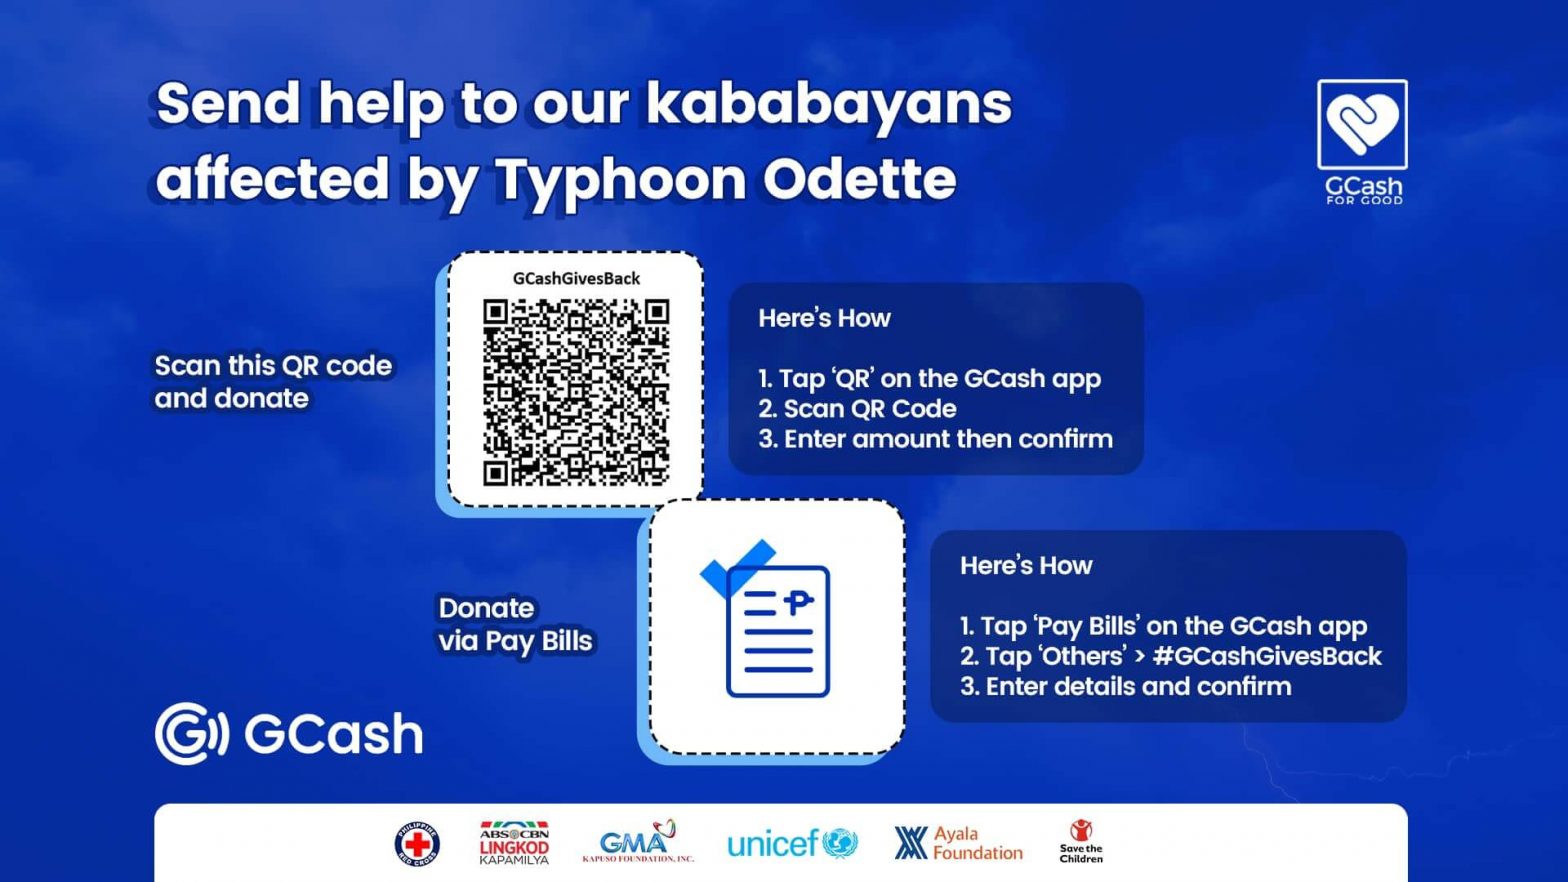 GCash helps in recovery efforts for Typhoon Odette victims with nationwide donation drive, loan holiday, wallet limit adjustments